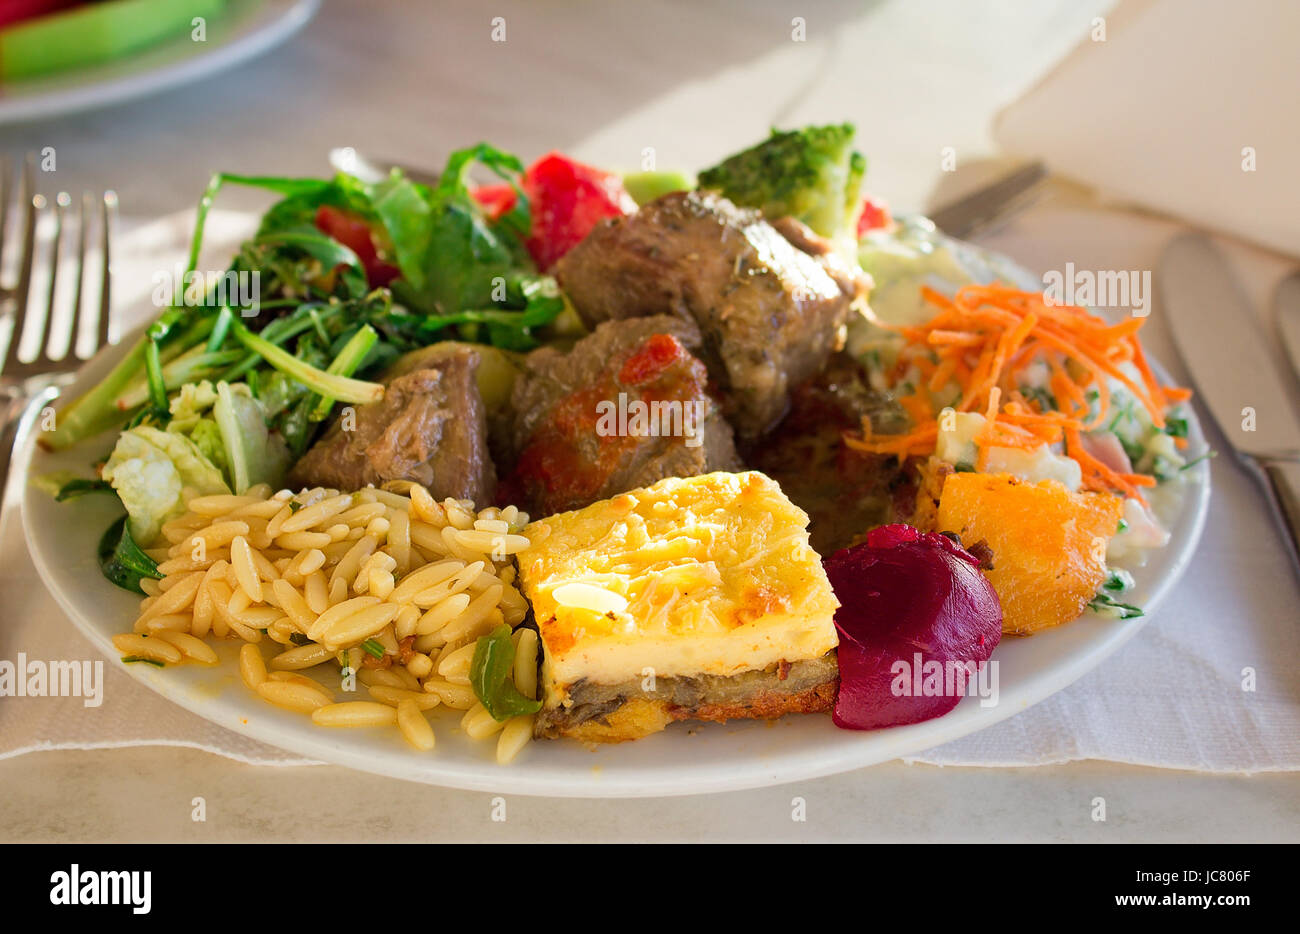 On a cloth of a table the dish with stewed meat, an omelet, vegetables is located. Stock Photo